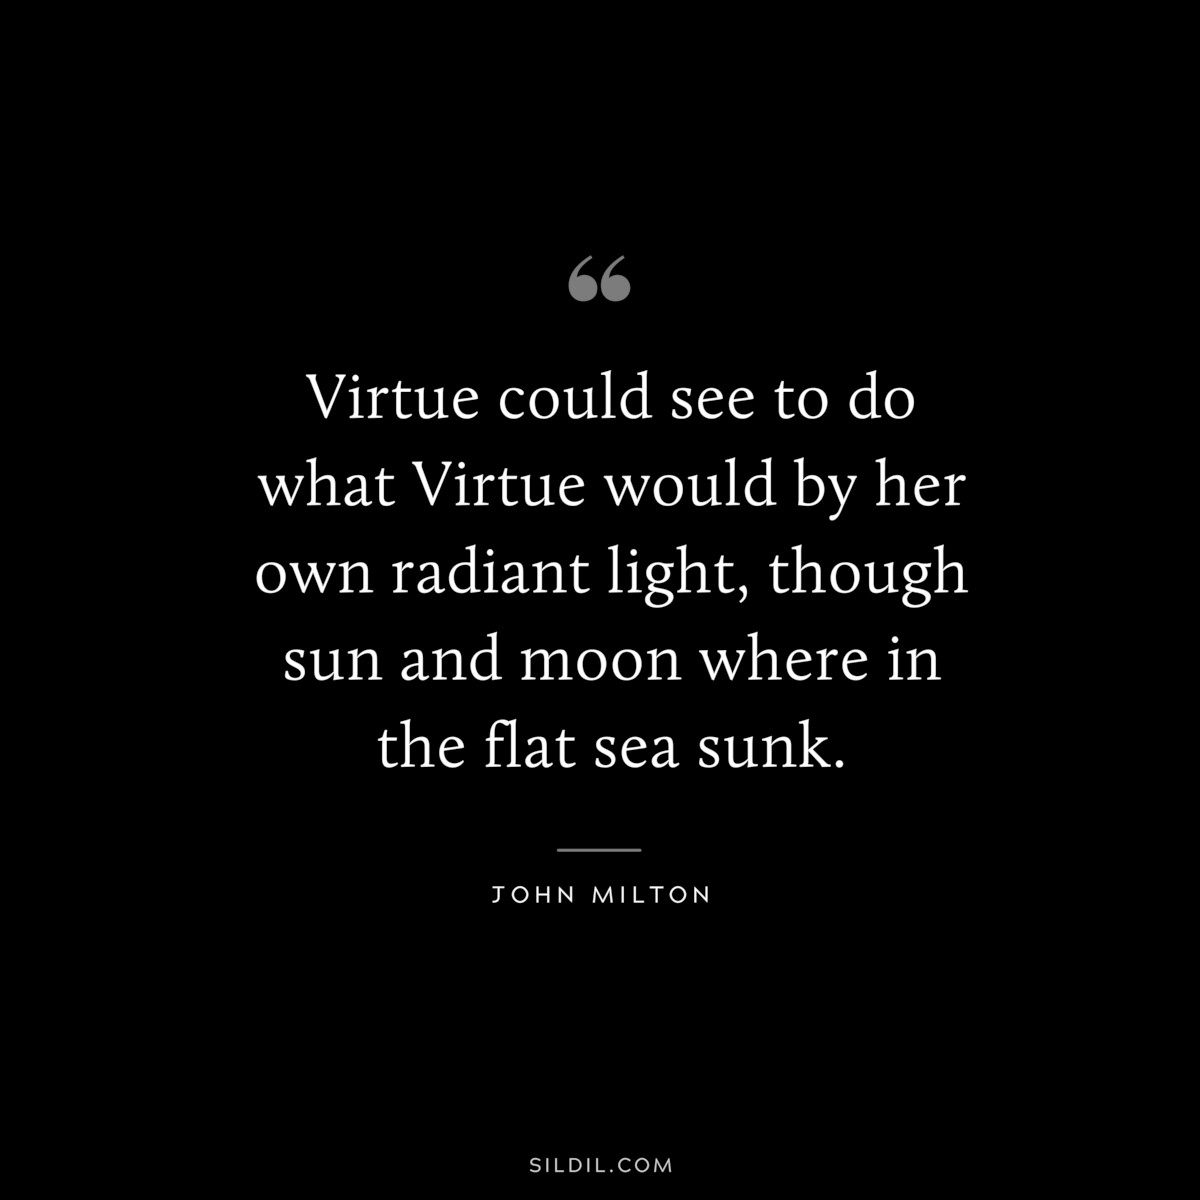 Virtue could see to do what Virtue would by her own radiant light, though sun and moon where in the flat sea sunk. ― John Milton